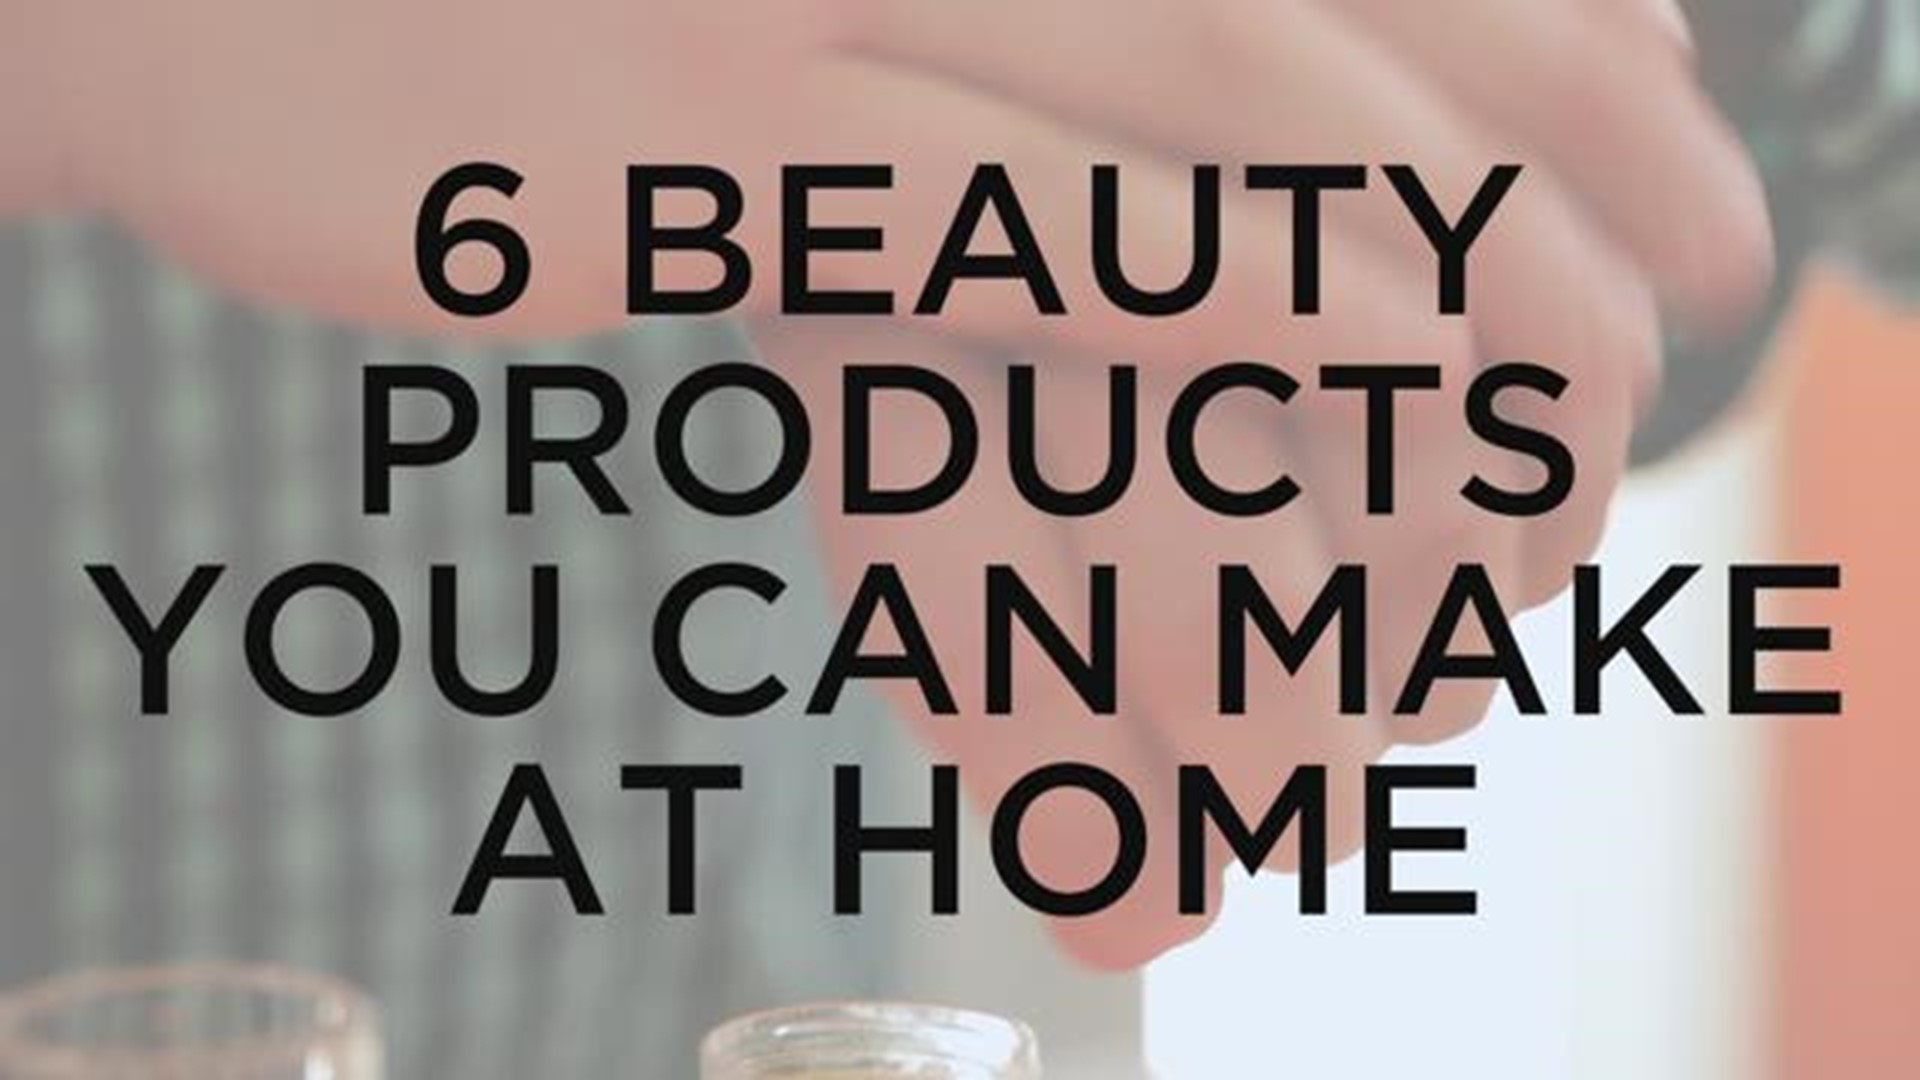 6 easy homemade beauty products anyone can make!